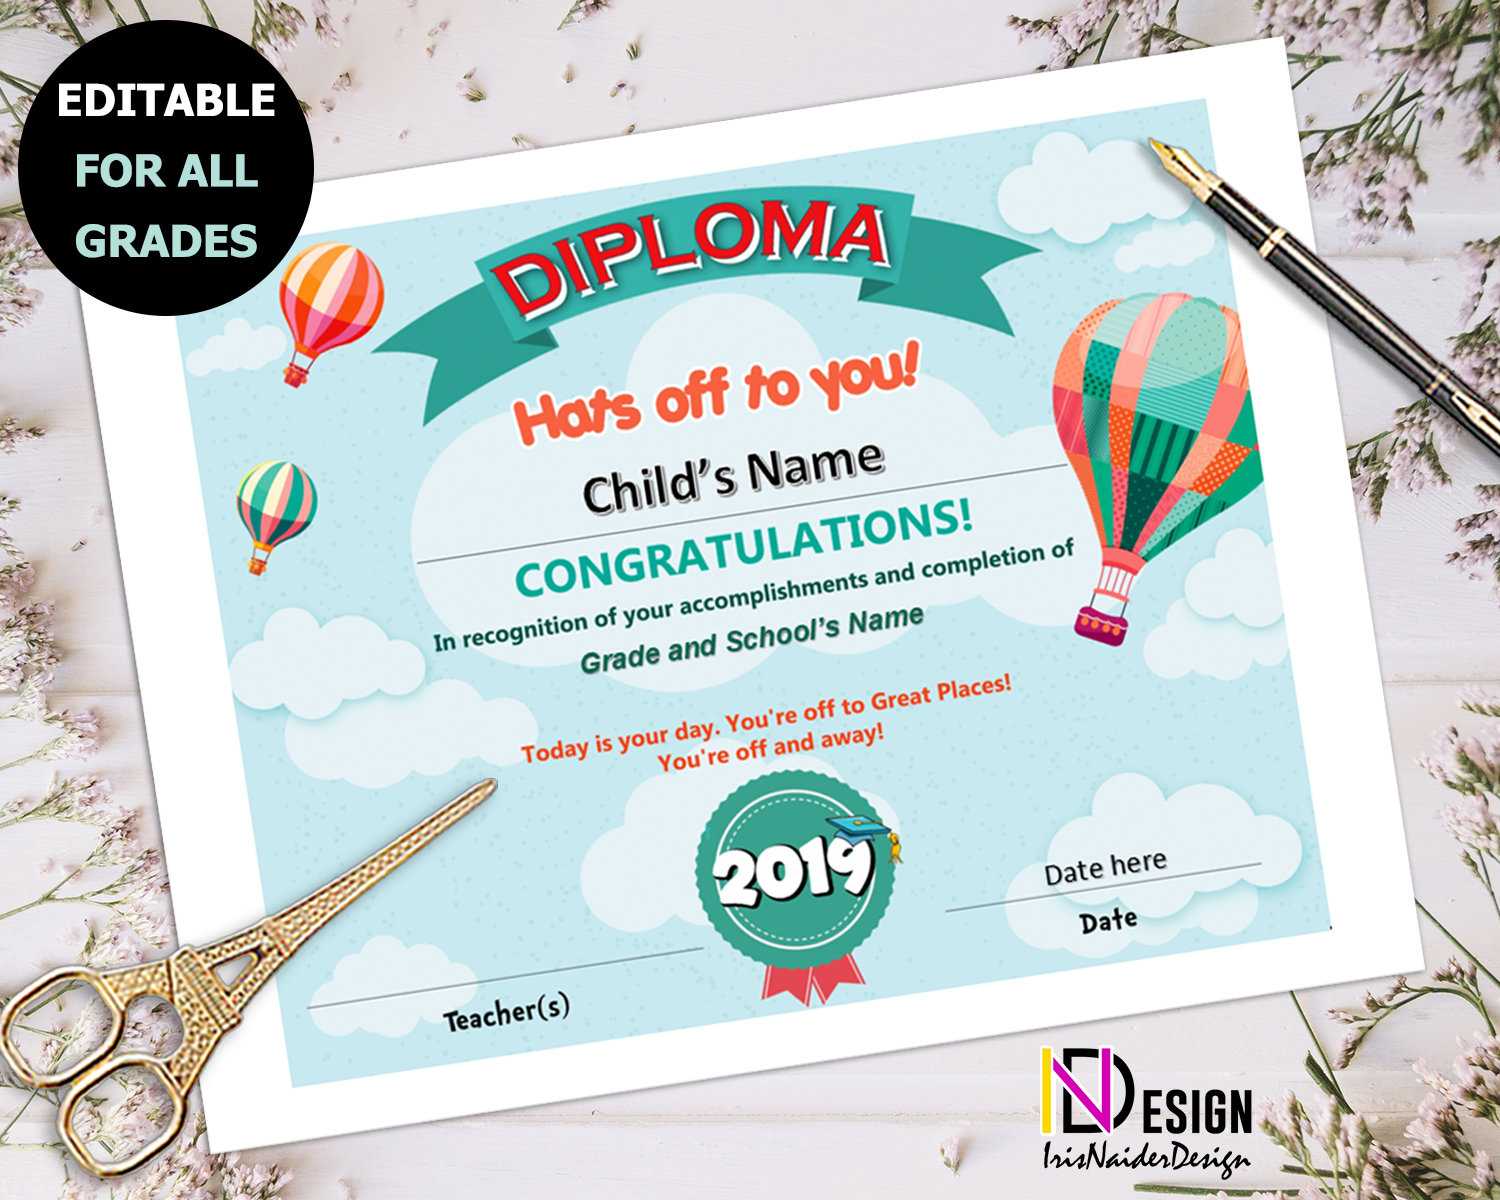 Diploma, Oh The Places You'll Go Inspired Certificate, Kindergarten, Pre K,  1St Grade, Graduation, 2Nd Grade, 3Rd Grade, 4Th Grade,5Th Grade Inside 5Th Grade Graduation Certificate Template